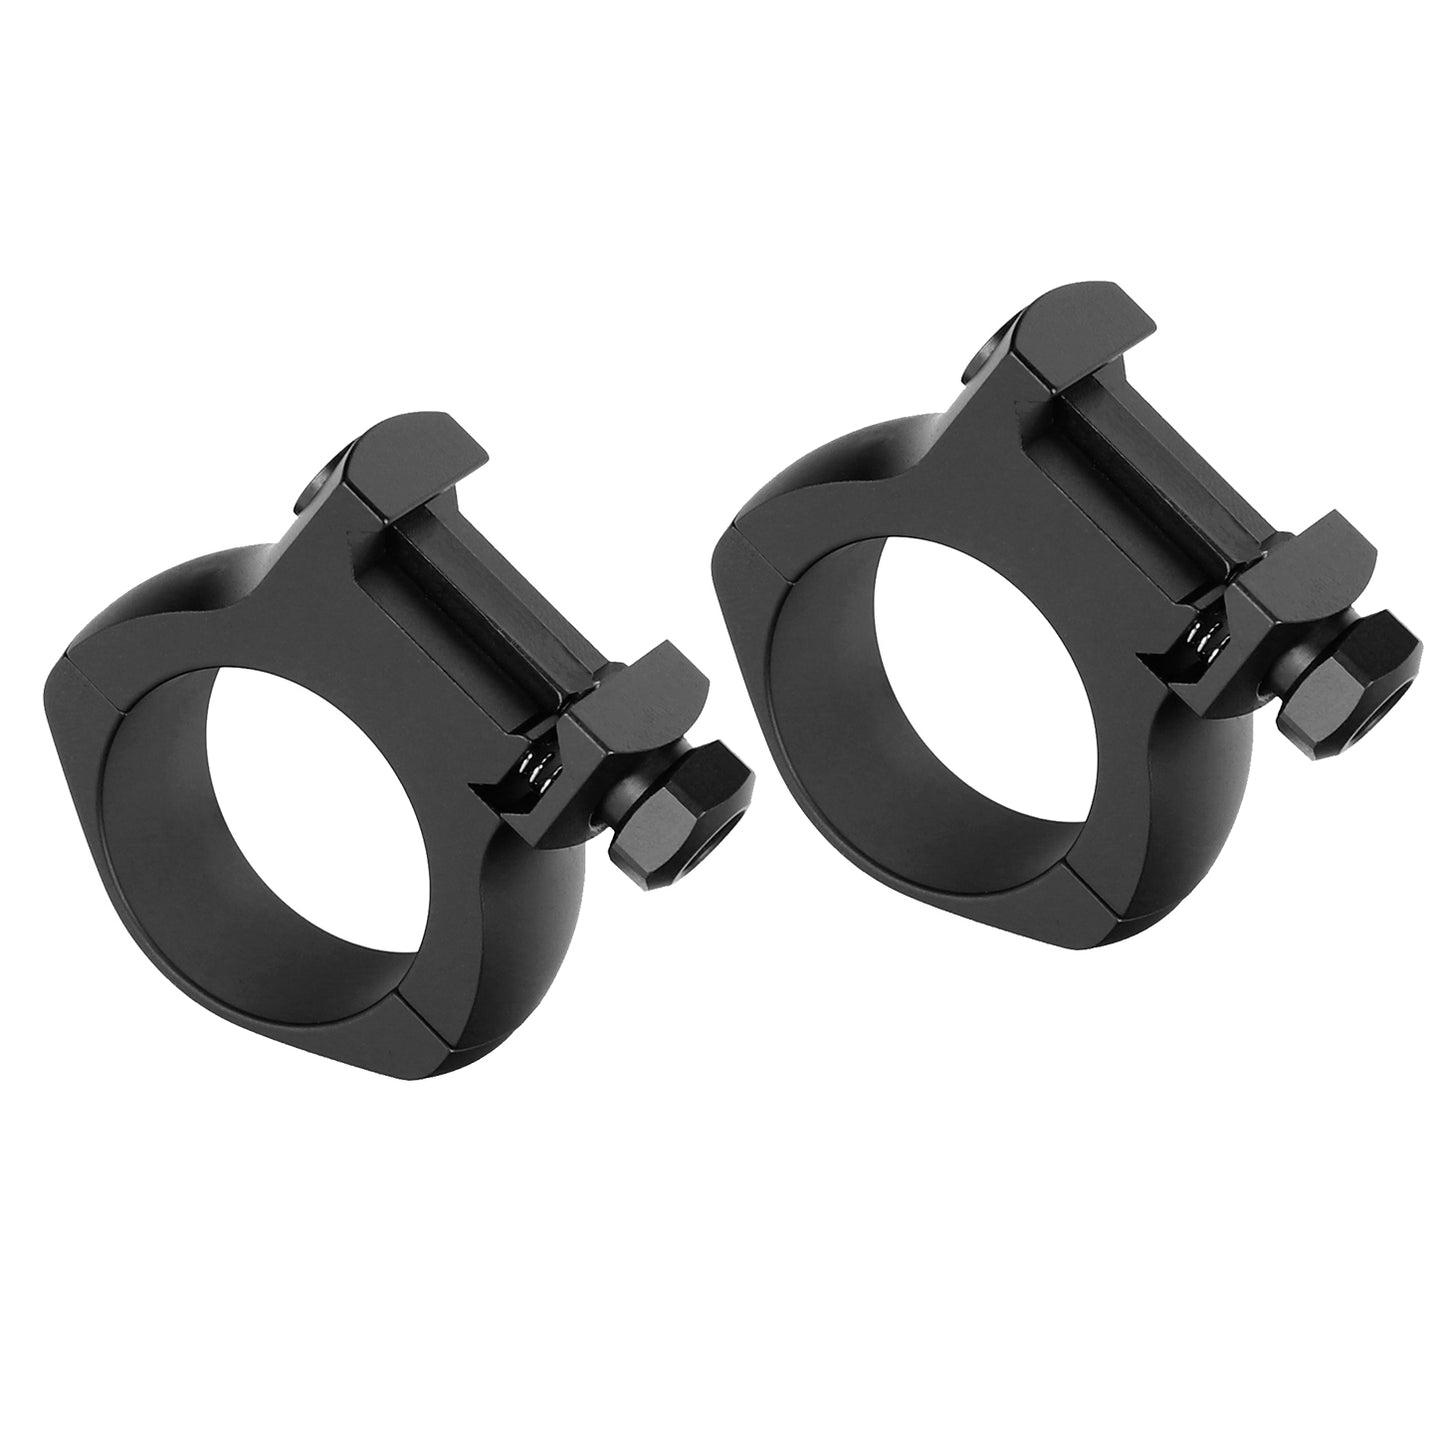 ohhunt® Pro 30mm Scope Rings for Picatinny Rail 7075 Aluminum High Profile